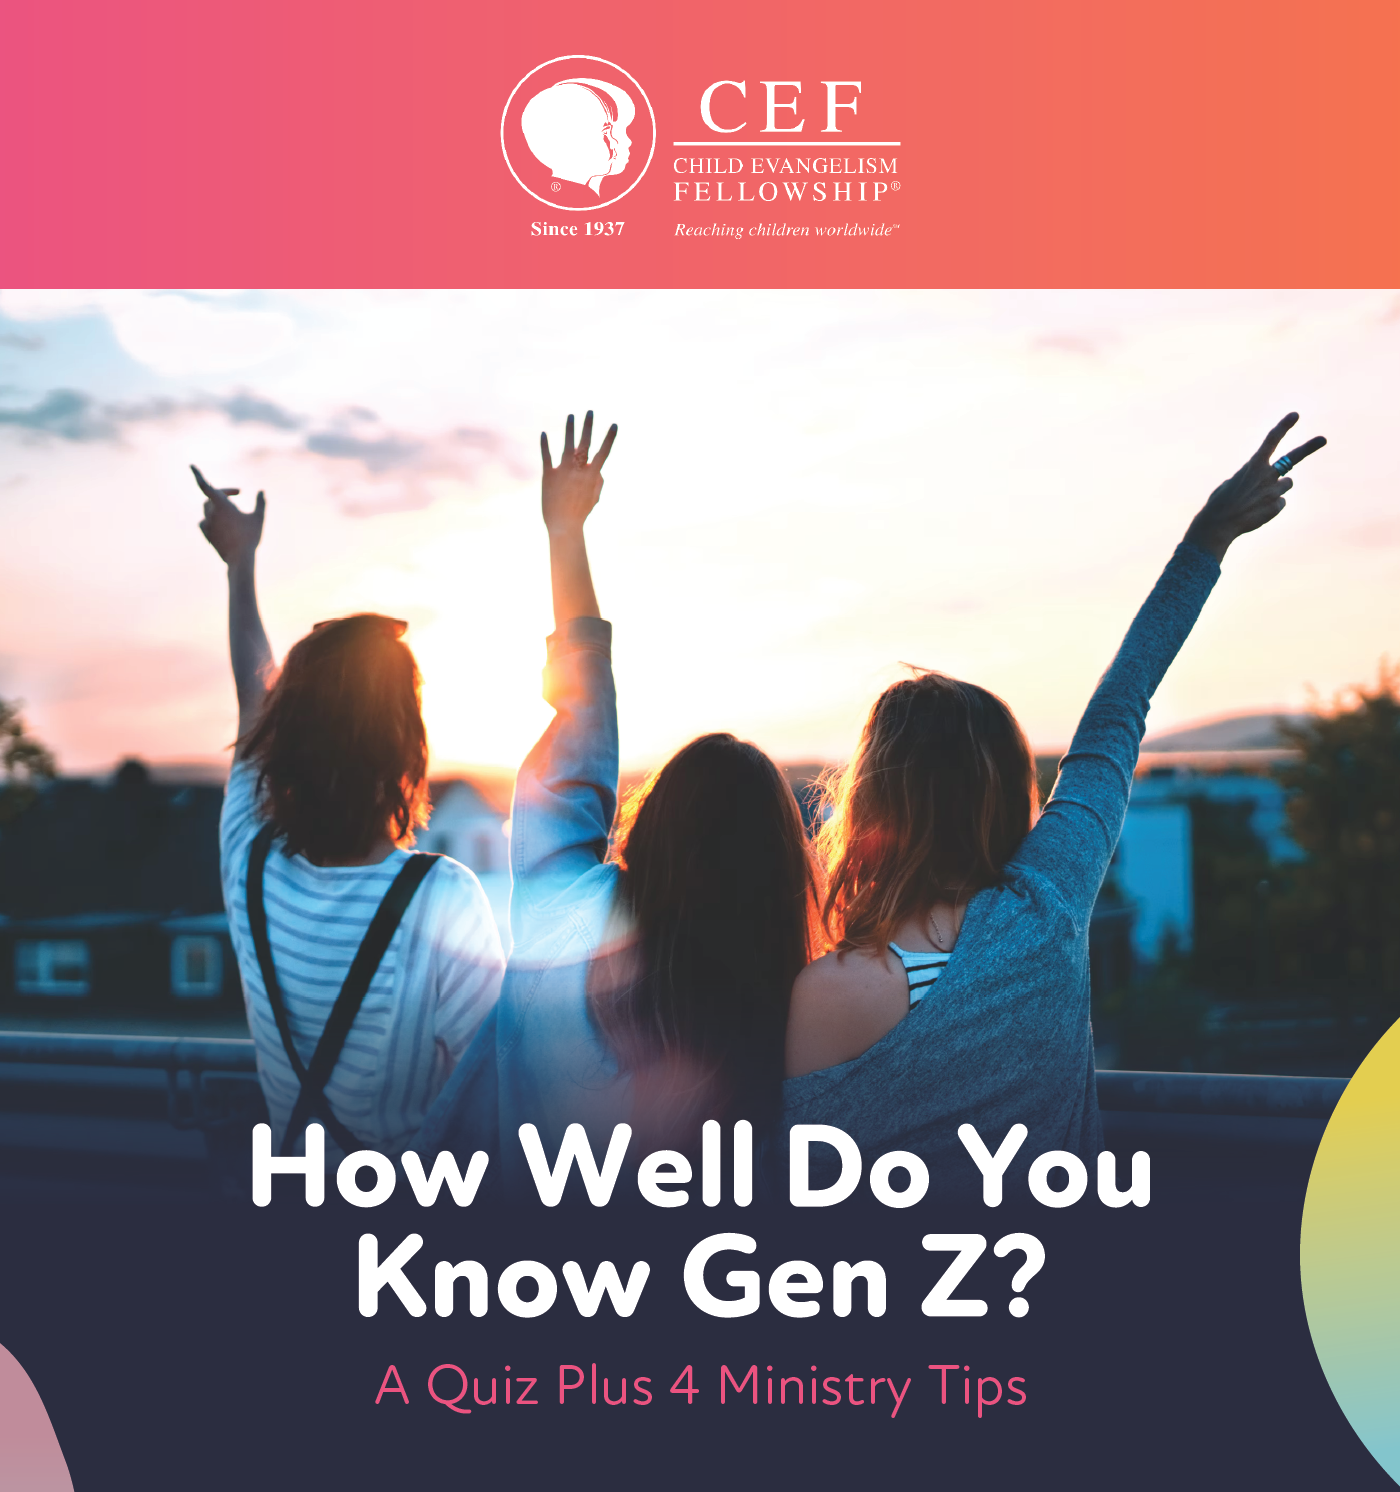 How Well Do You Know Gen Z?